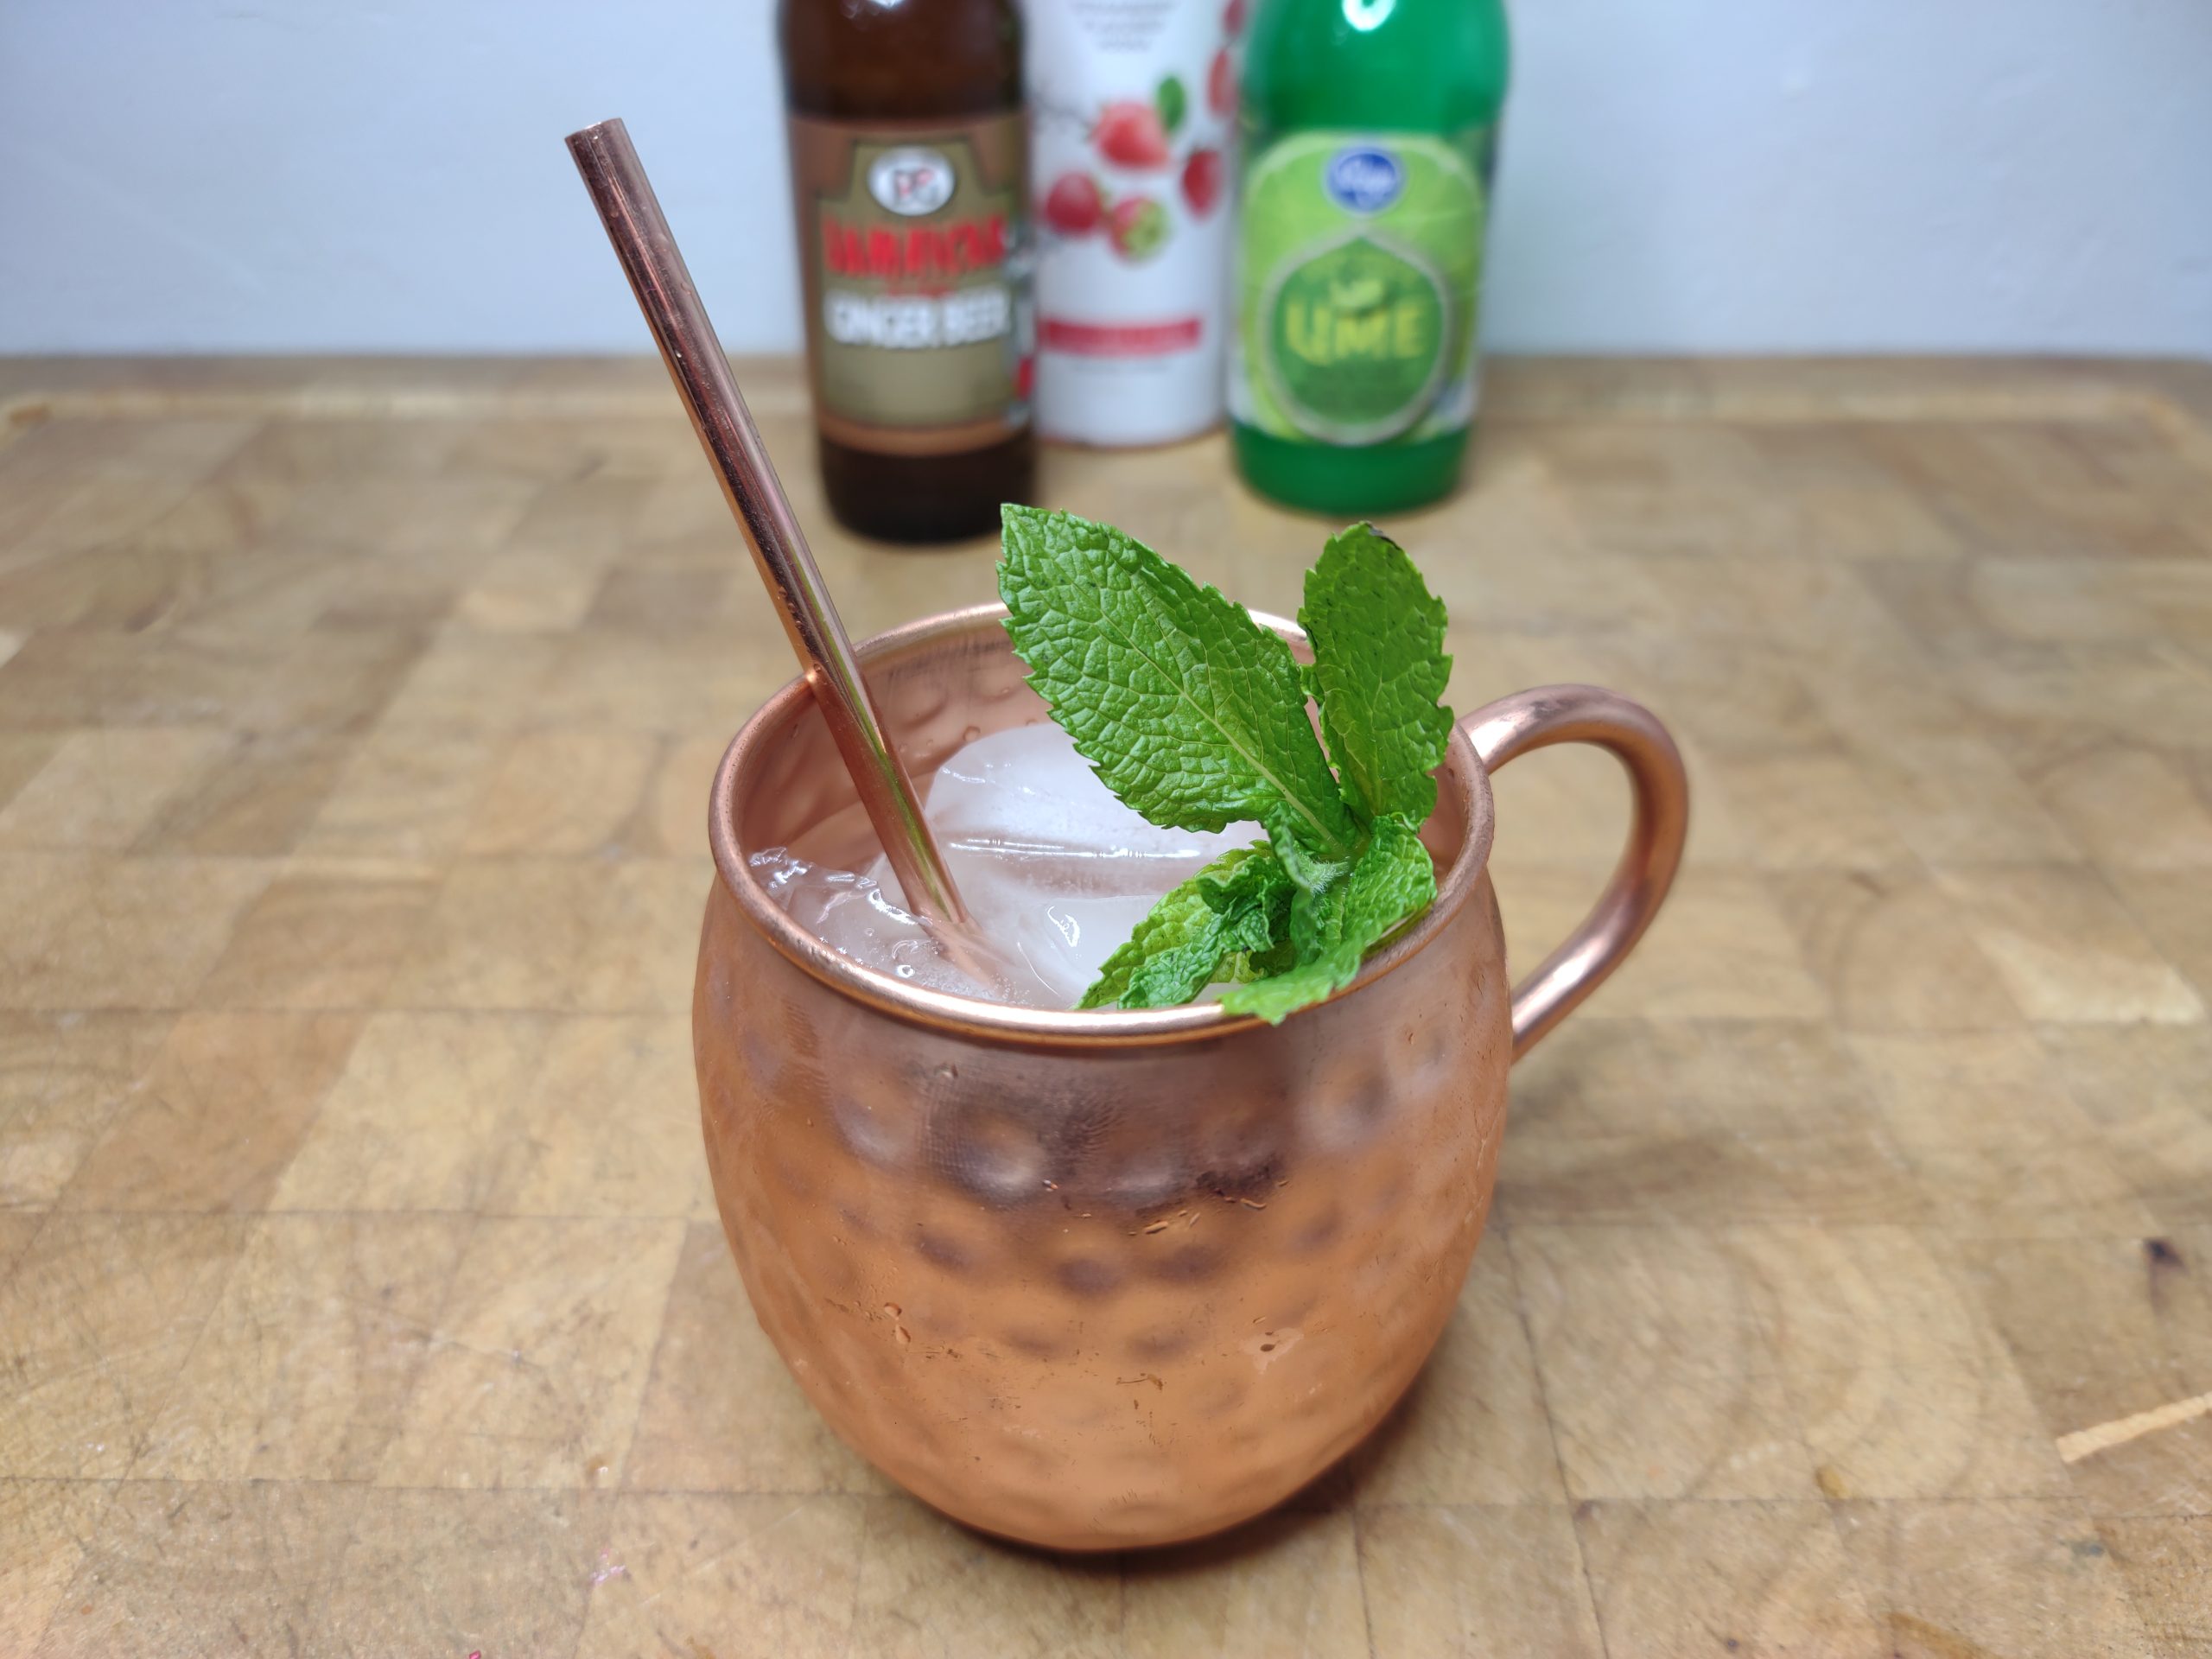 strawberry moscow mule in a copper mug with mint in the mug.  ingredient bottles in the background.